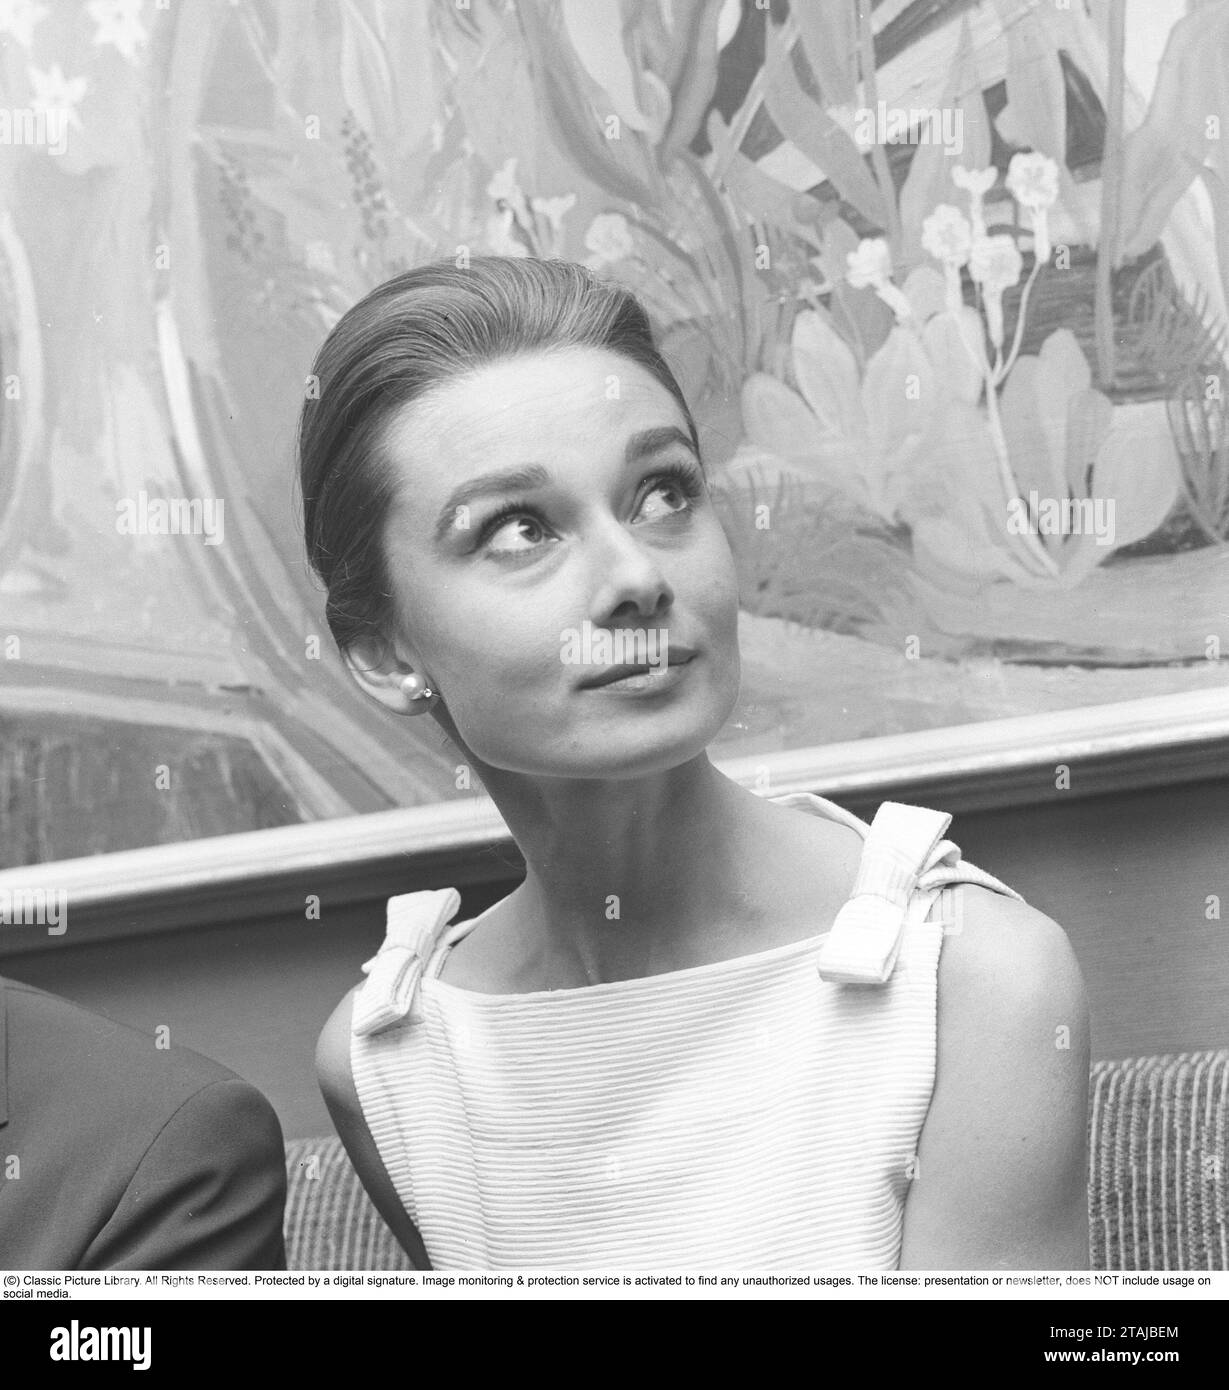 Audrey Hepburn. British actress. Born 4 may 1929 - 20 january 1993. Pictured when being 30 years old,  visiting Stockholm Sweden in September 1959. Stock Photo